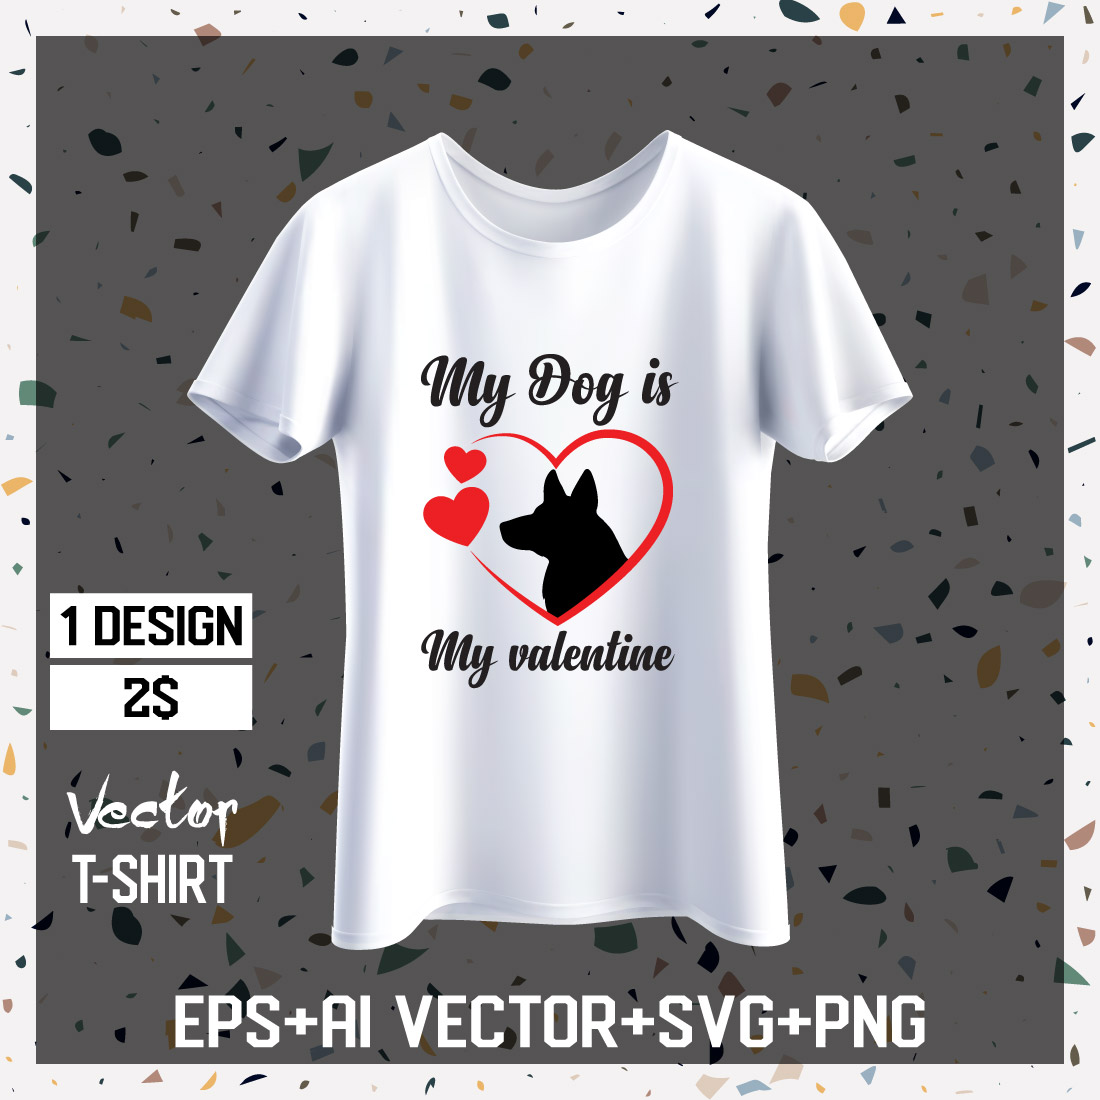 T-shirt My Dog is my Valentine Design cover image.